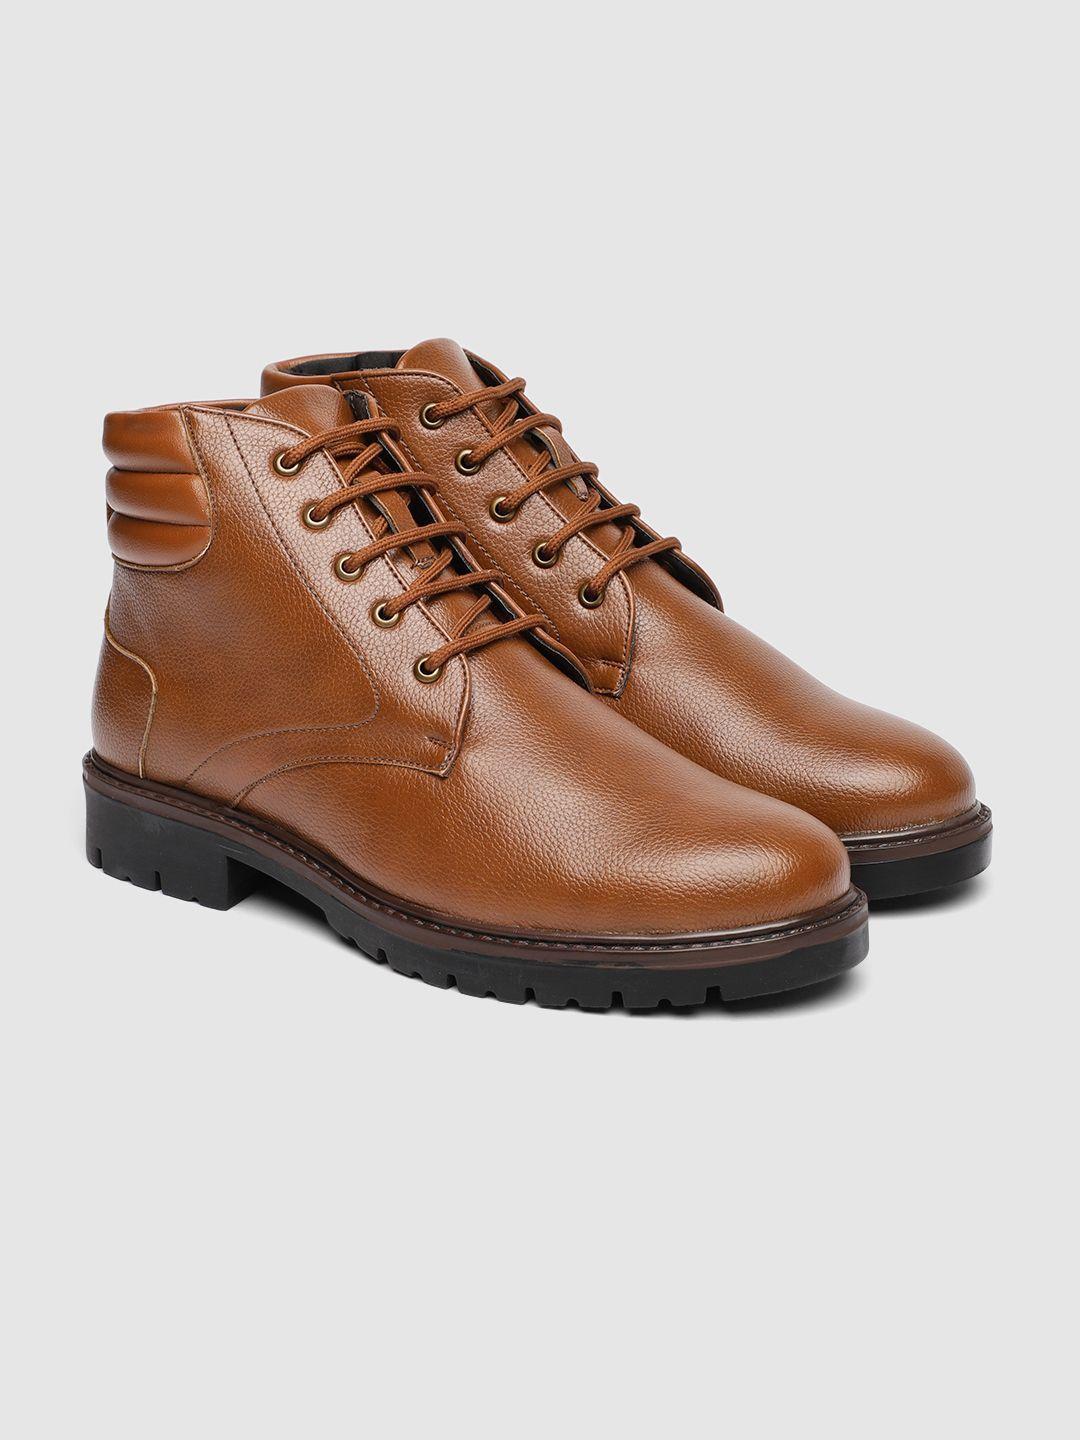 carlton london men solid mid-top derby style boots